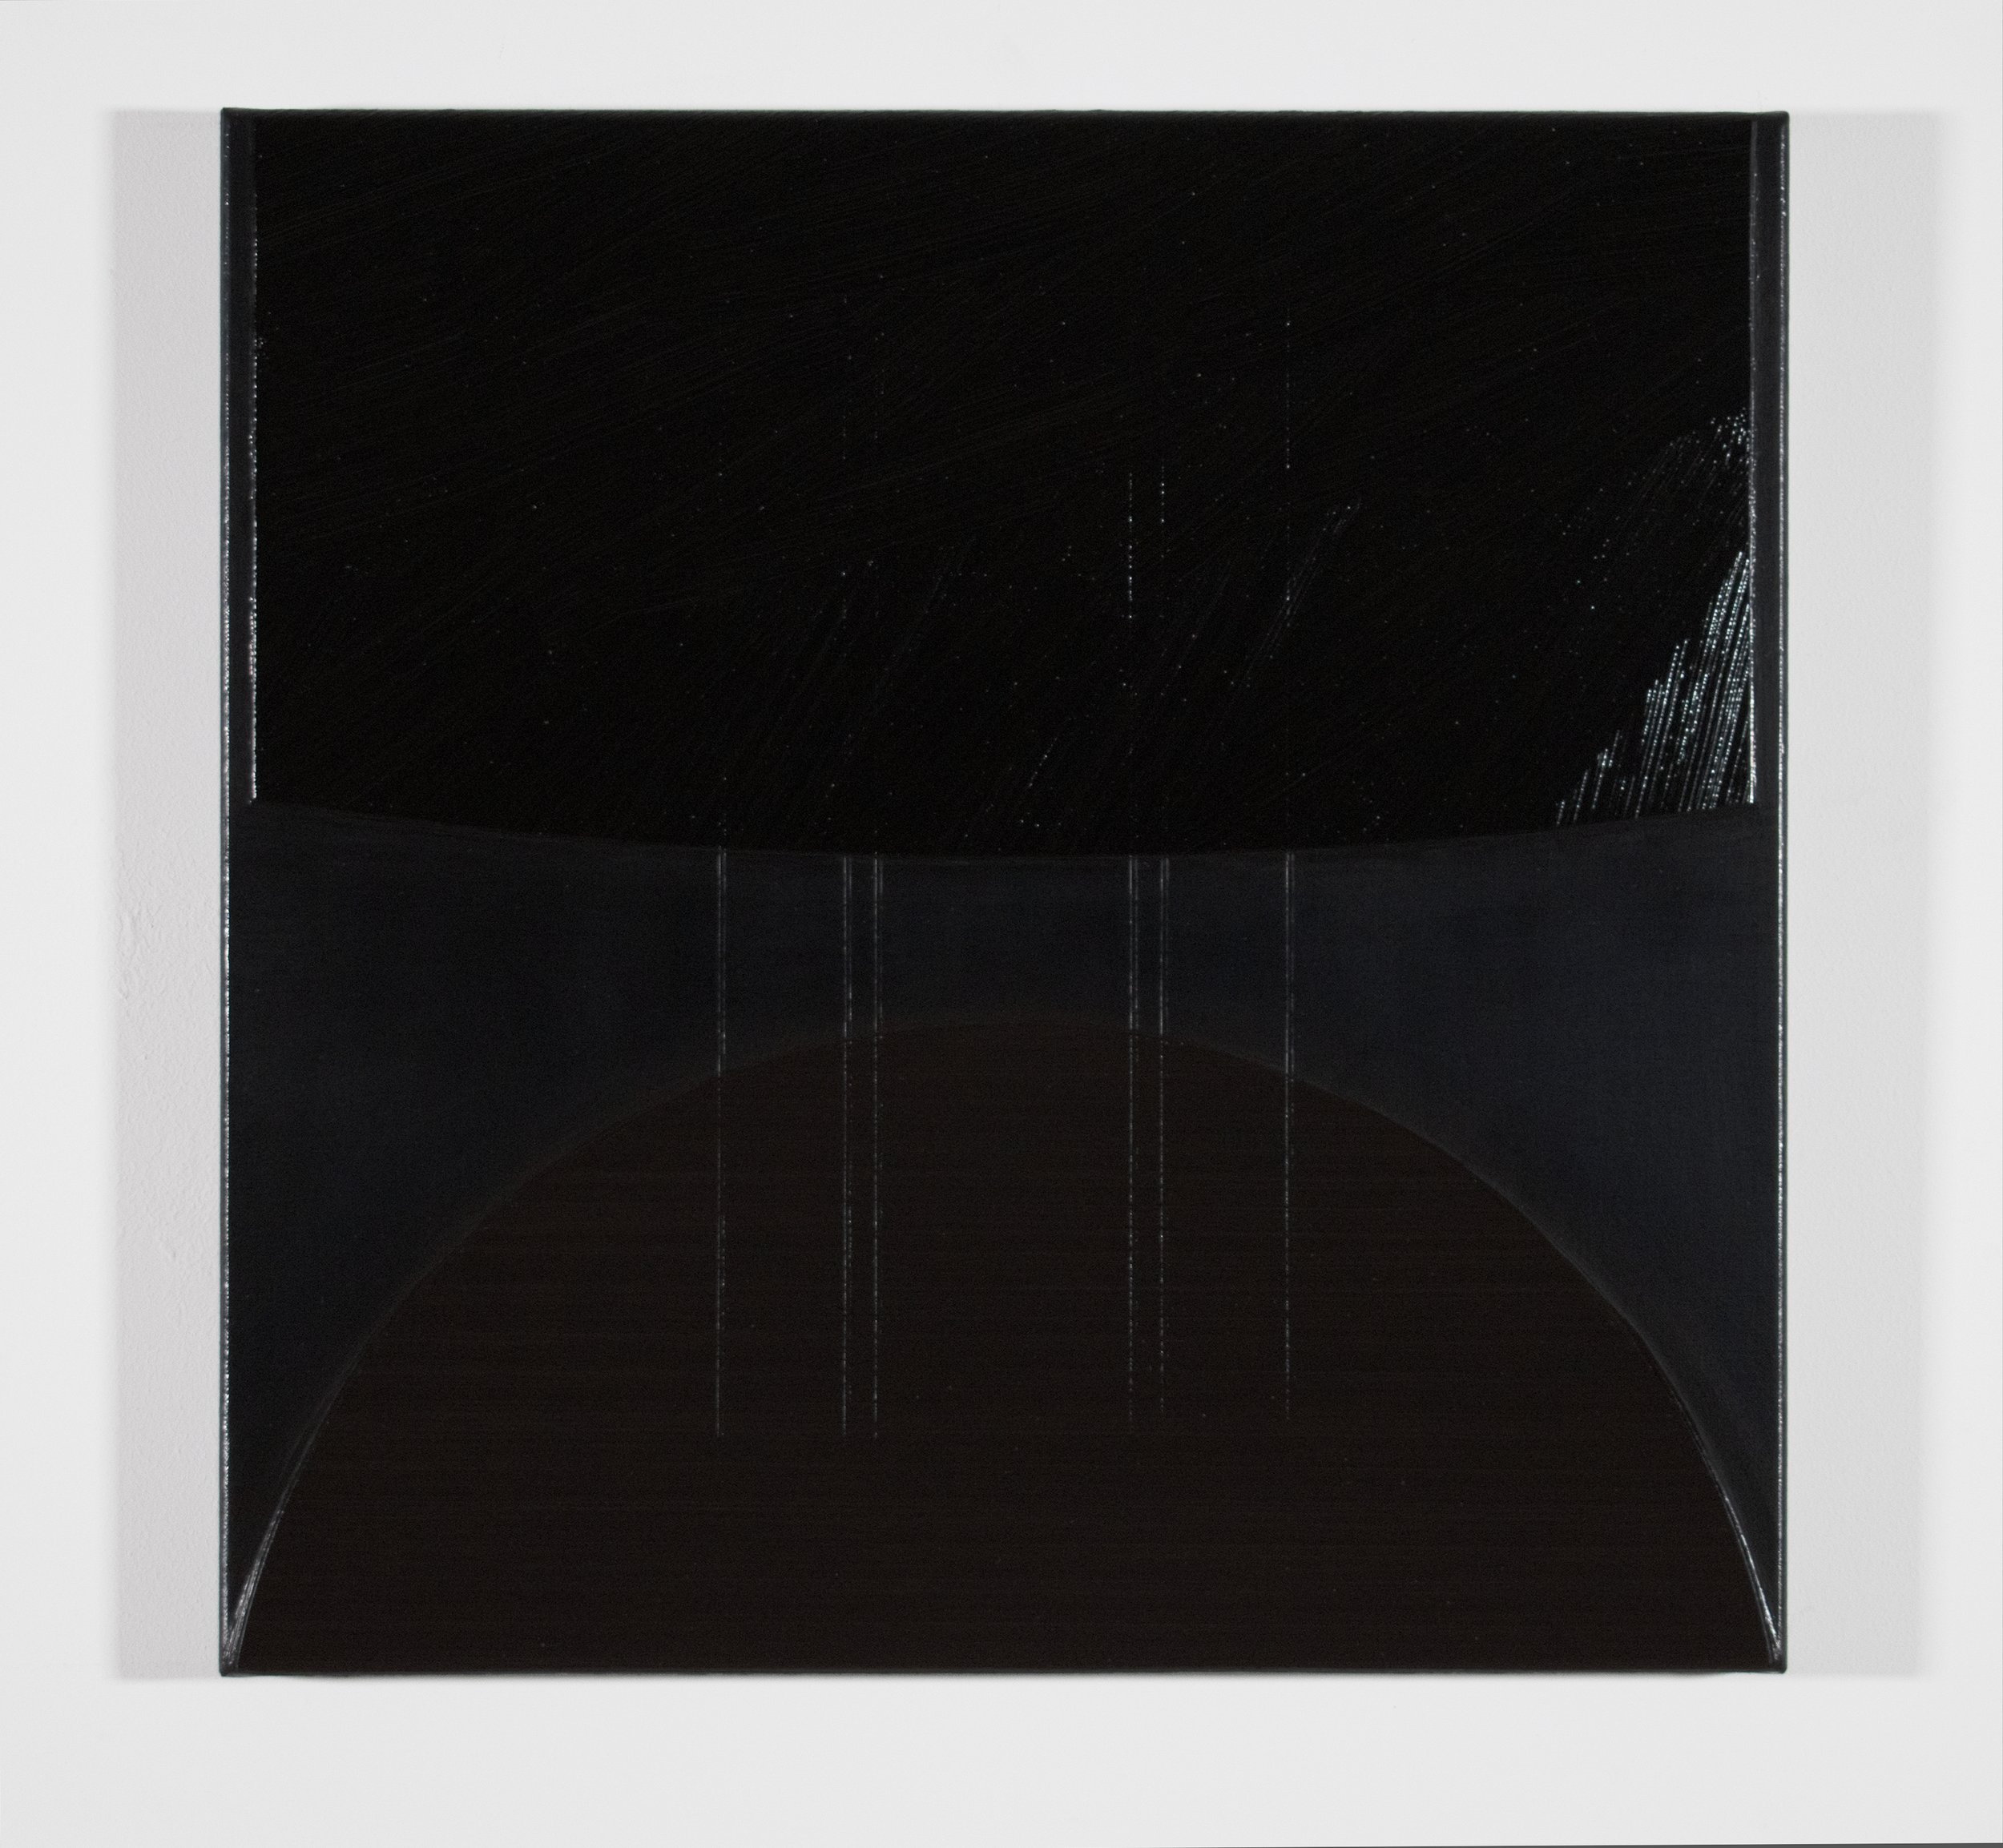 3 Above-metrum [2001-20220204], oil on canvas, 23.63x23.63 in. [60x60cm]_a (Copy)